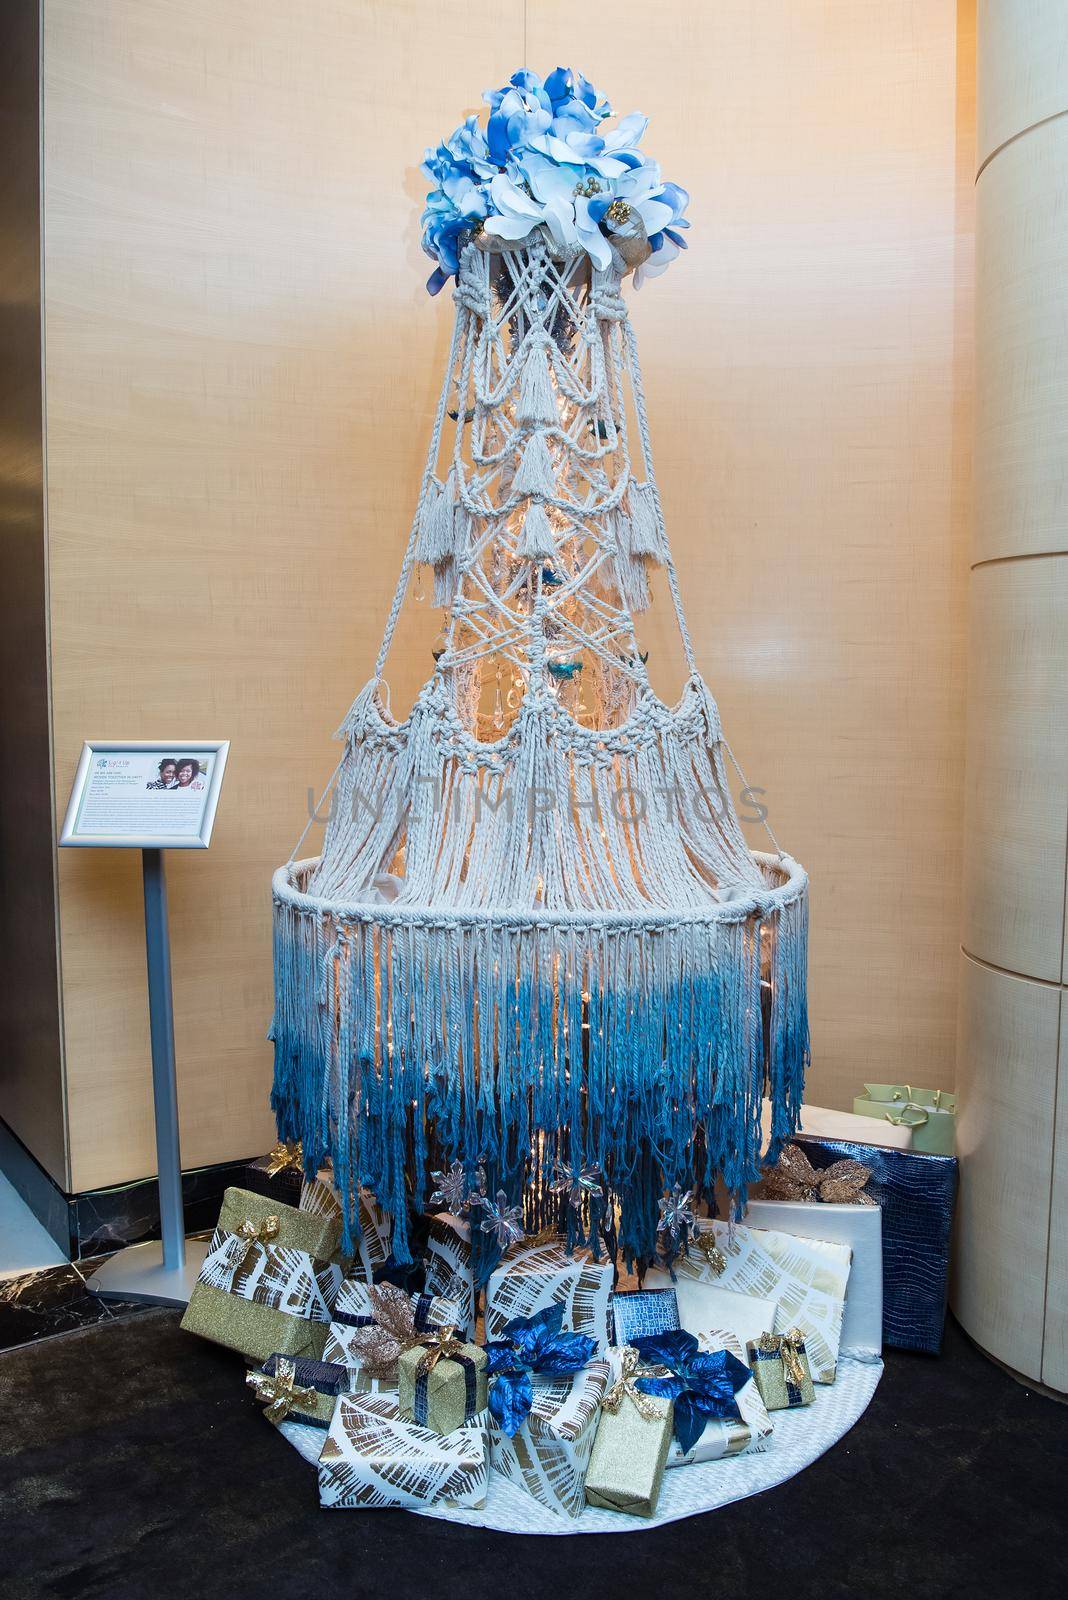 Homemade chandelier Christmas tree with blue and white flowers and rope. by jyurinko